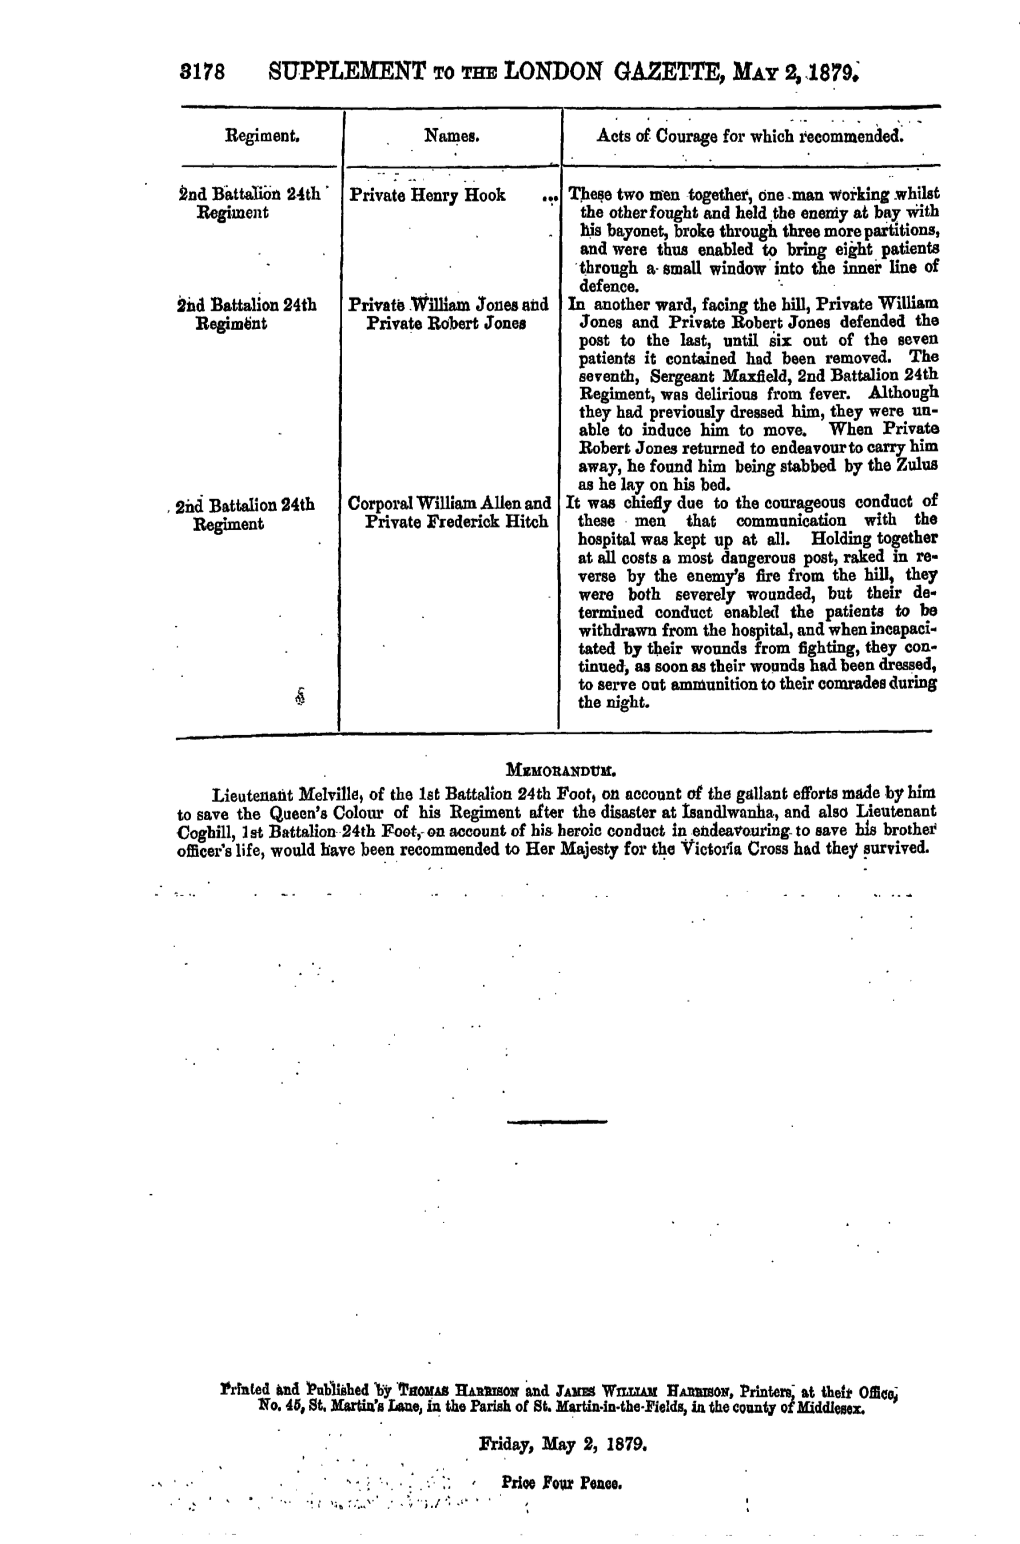 3178 Supplement to the London Gazette, May 2,1879